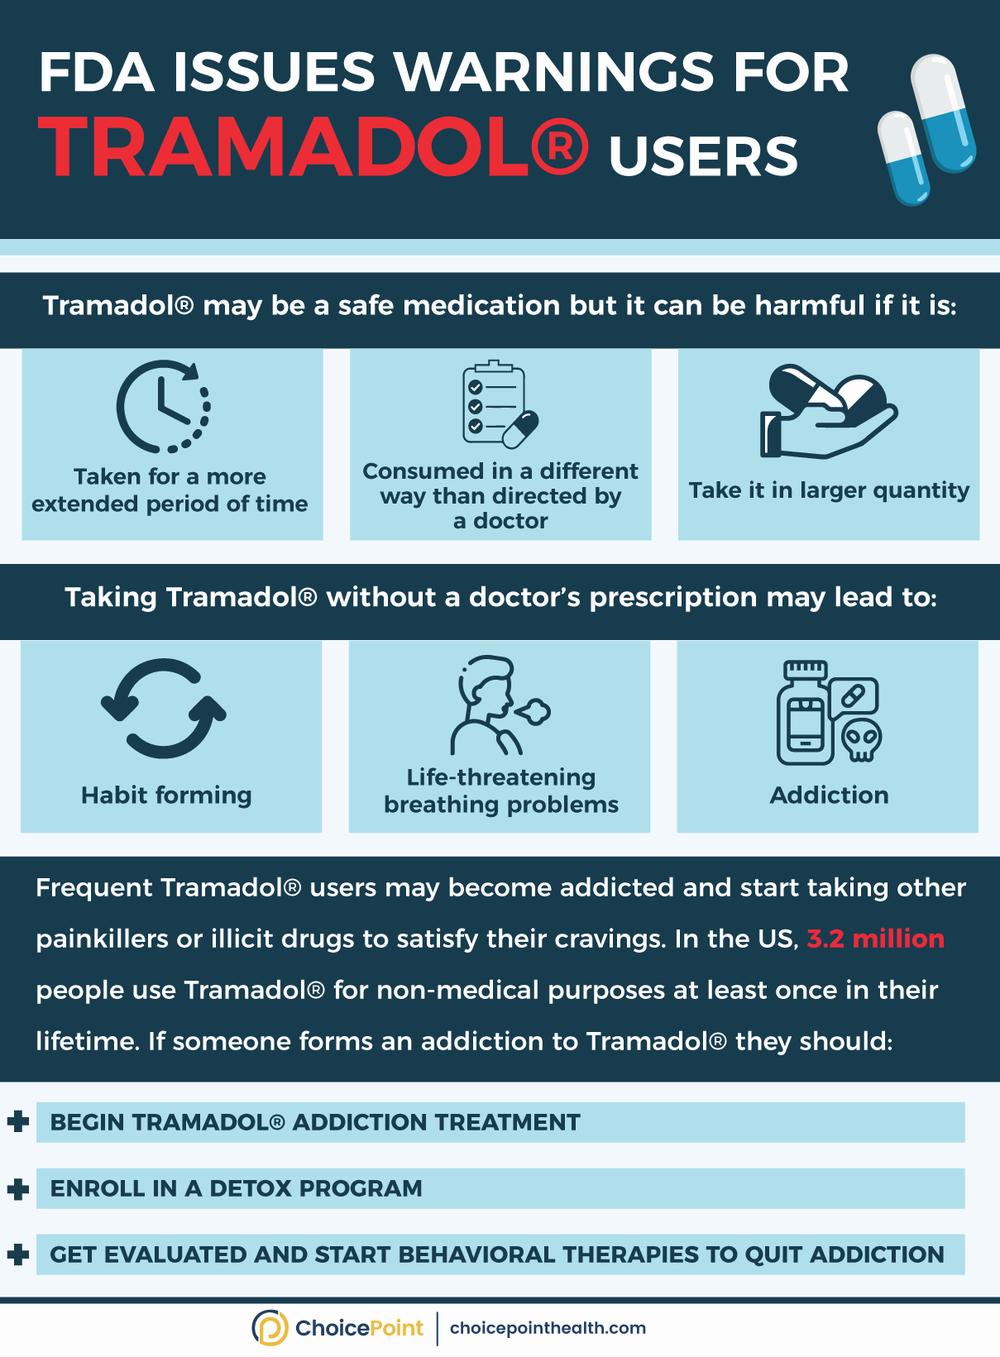 A warning from the FDA about the dangers of Tramadol when taken incorrectly.